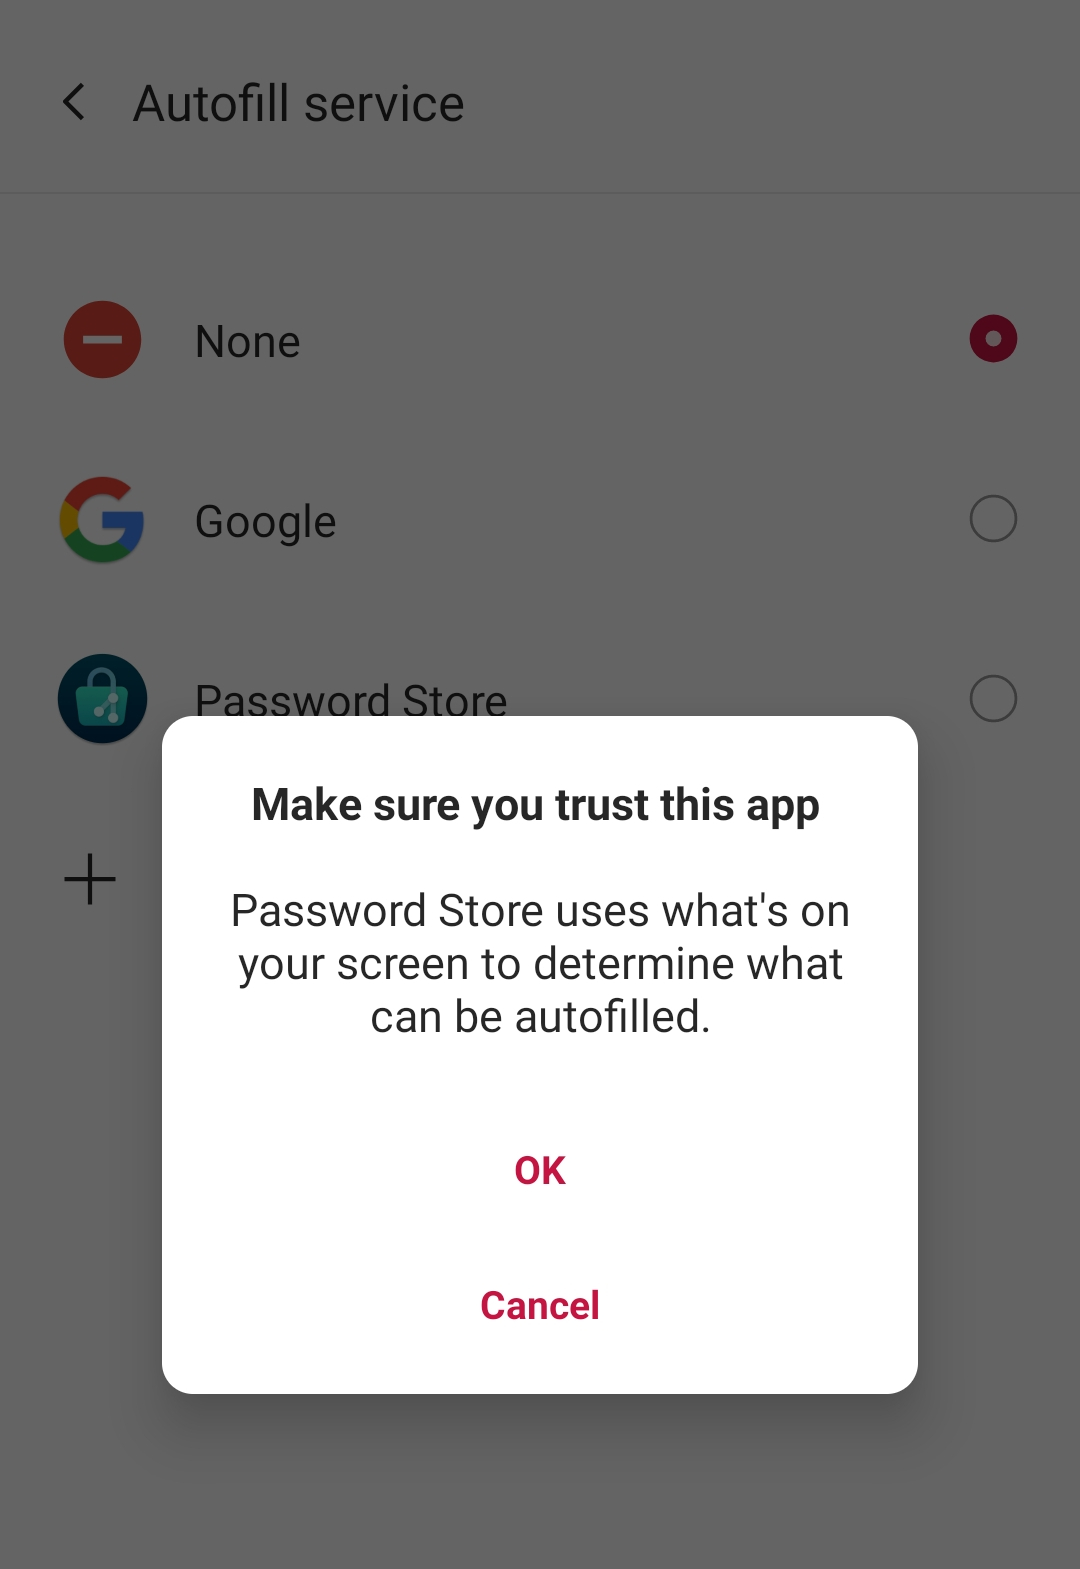 Password Store as autofill service confirmation dialog